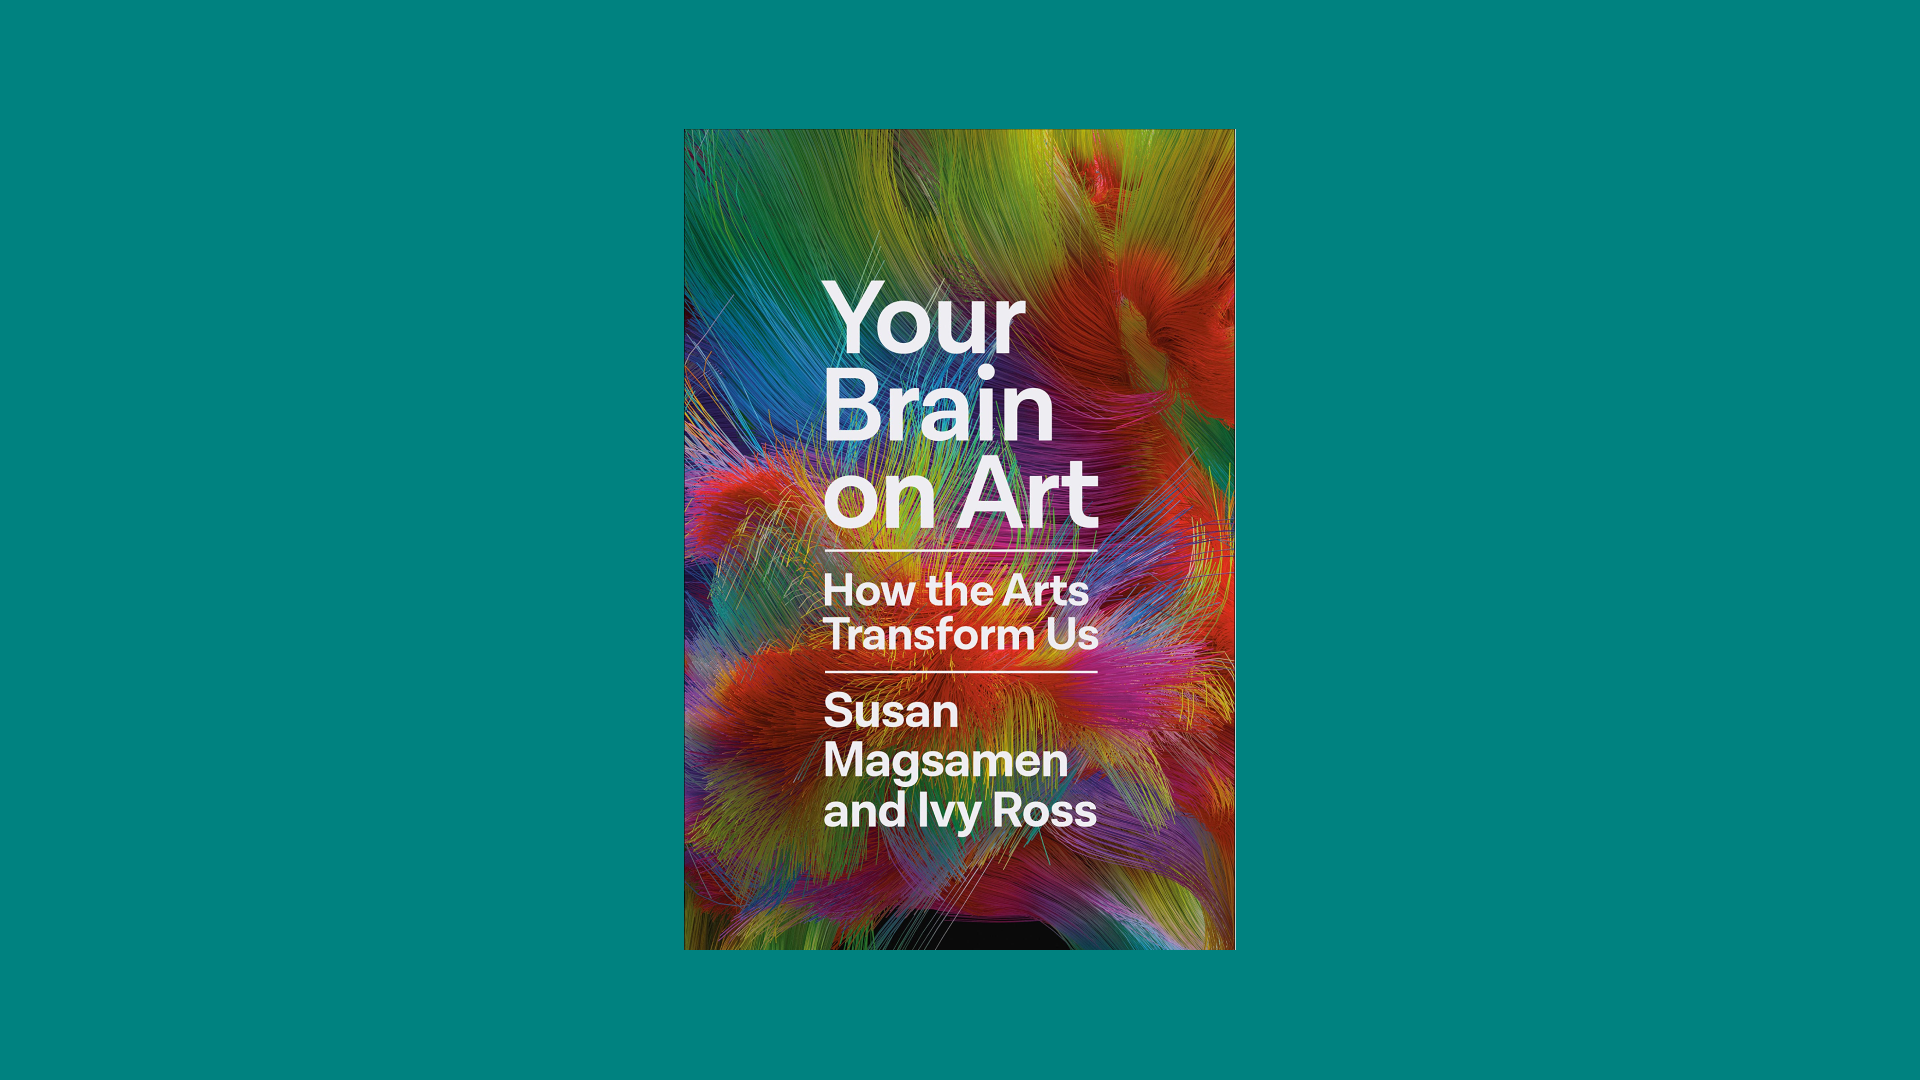 Cover of the book "Your Brain on Art: How the Arts Transform Us"